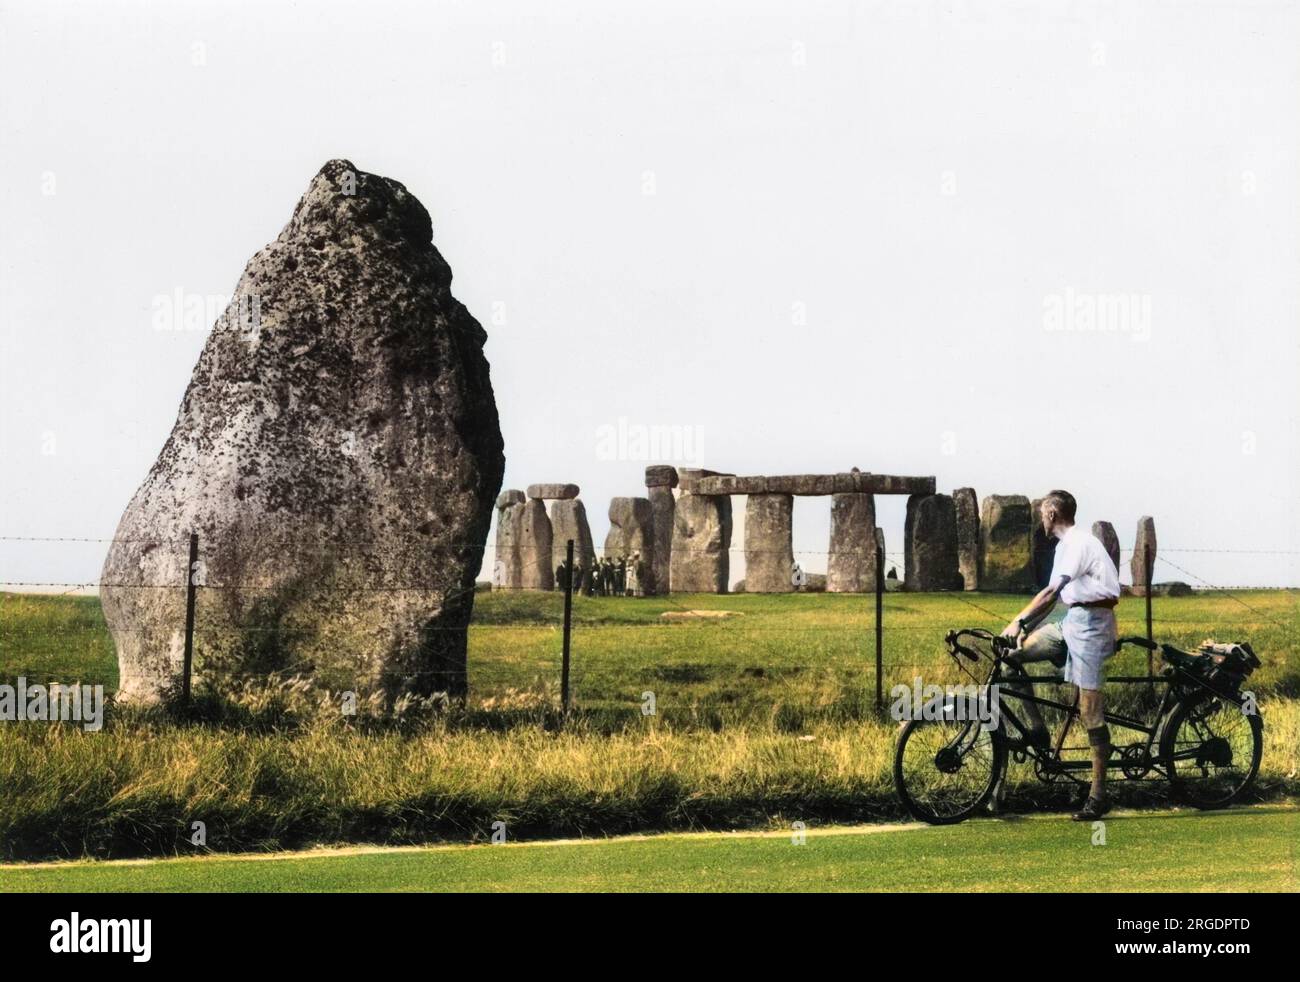 A cyclist on a tandem stops to admire the ancient standing stones at Stonehenge, Wiltshire, England, where a guided tour is taking place. Stock Photo